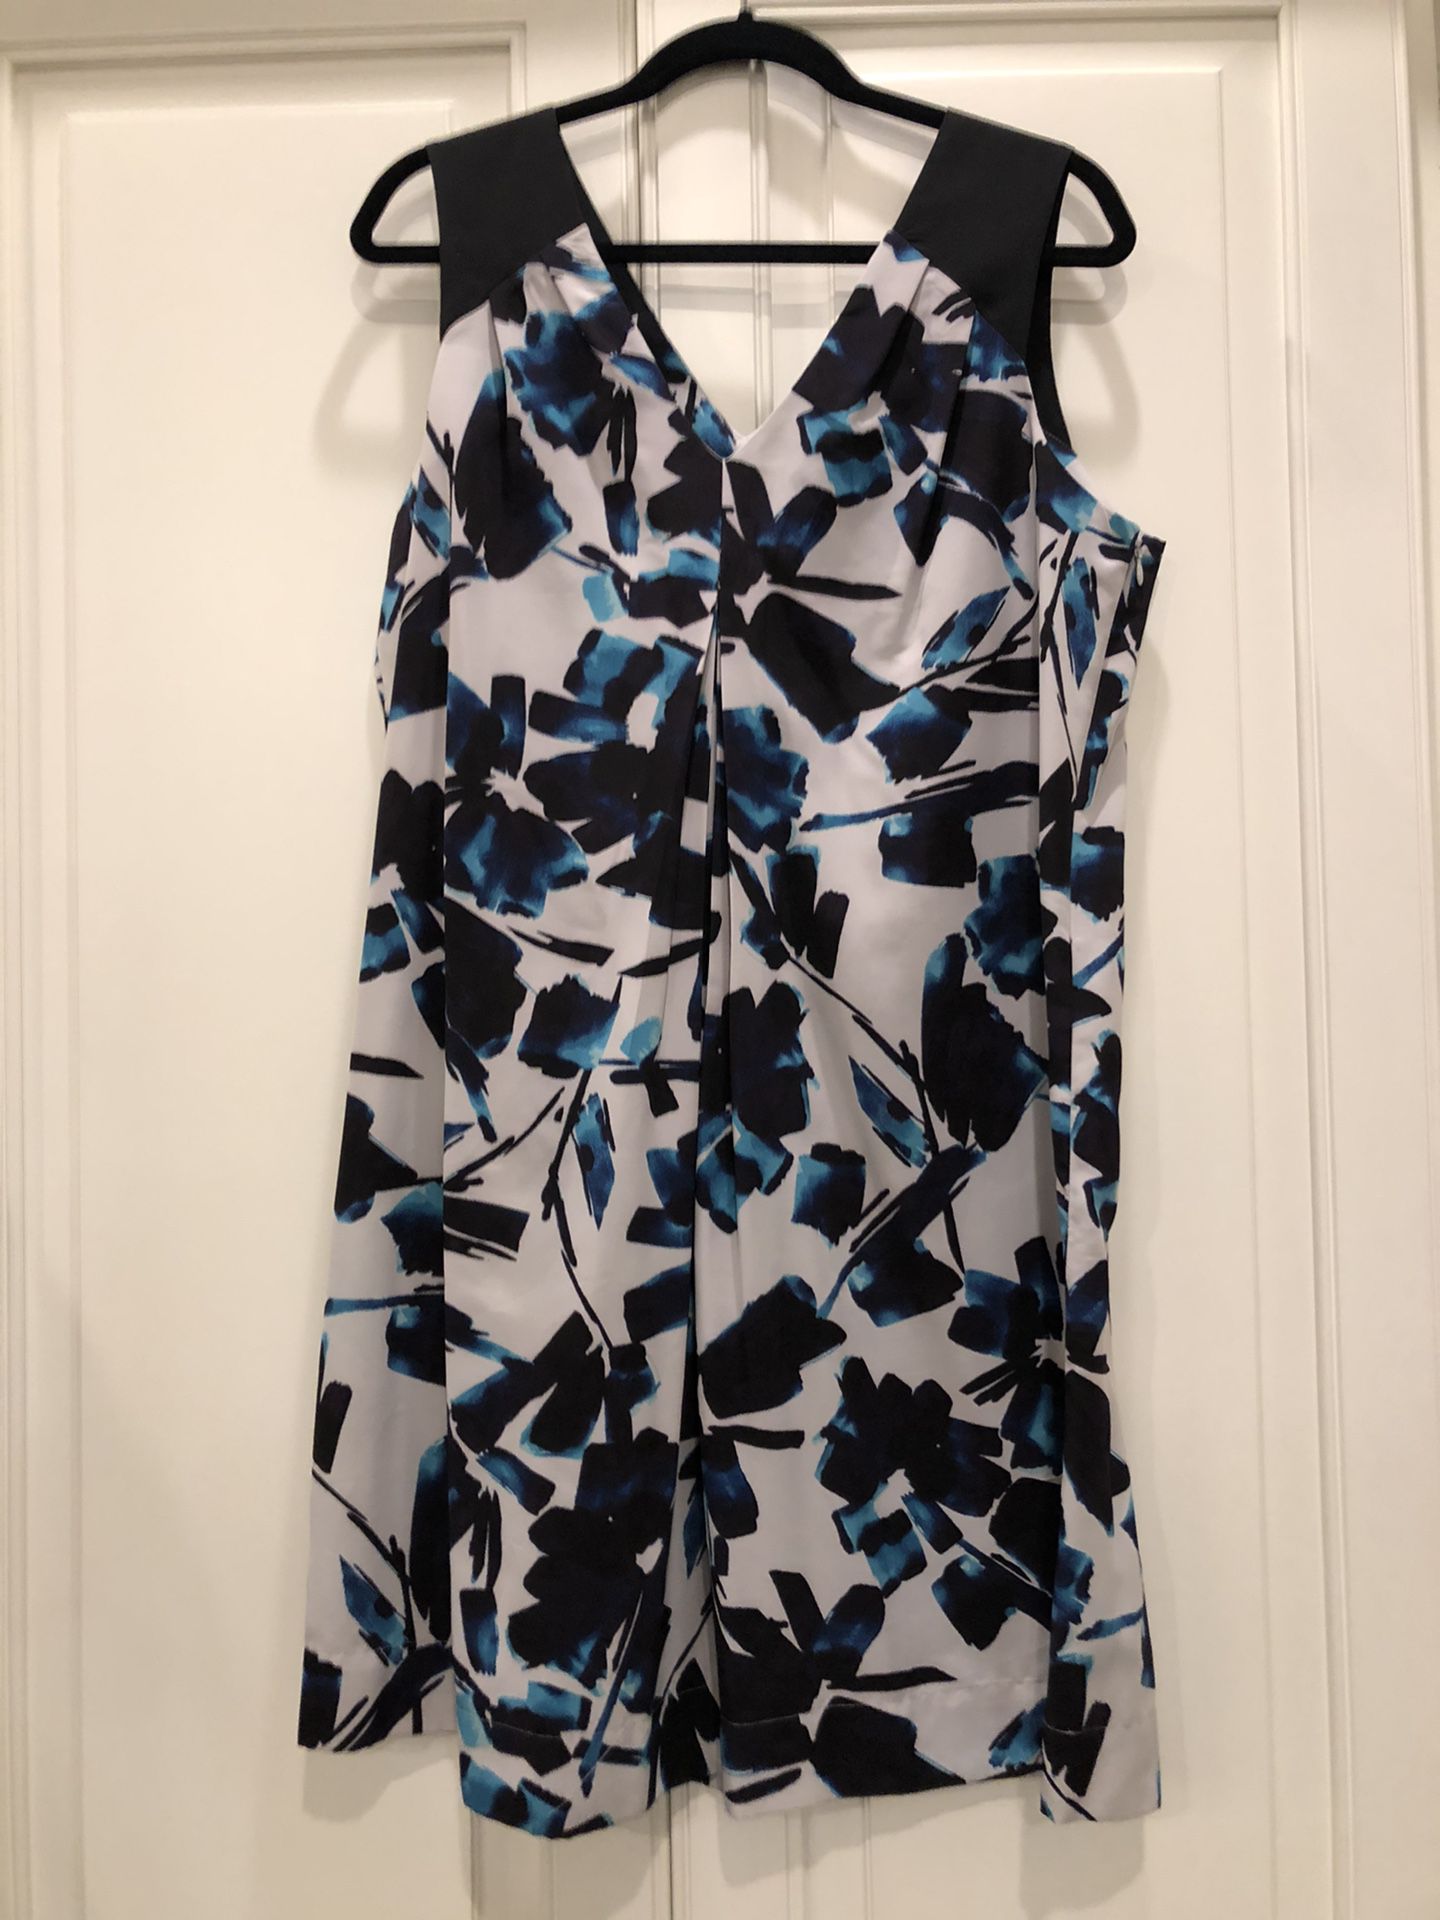 Floral Women’s Dress Size 16. Would be cute w/ leggings and cardigan. Venmo to hold located in Murray 